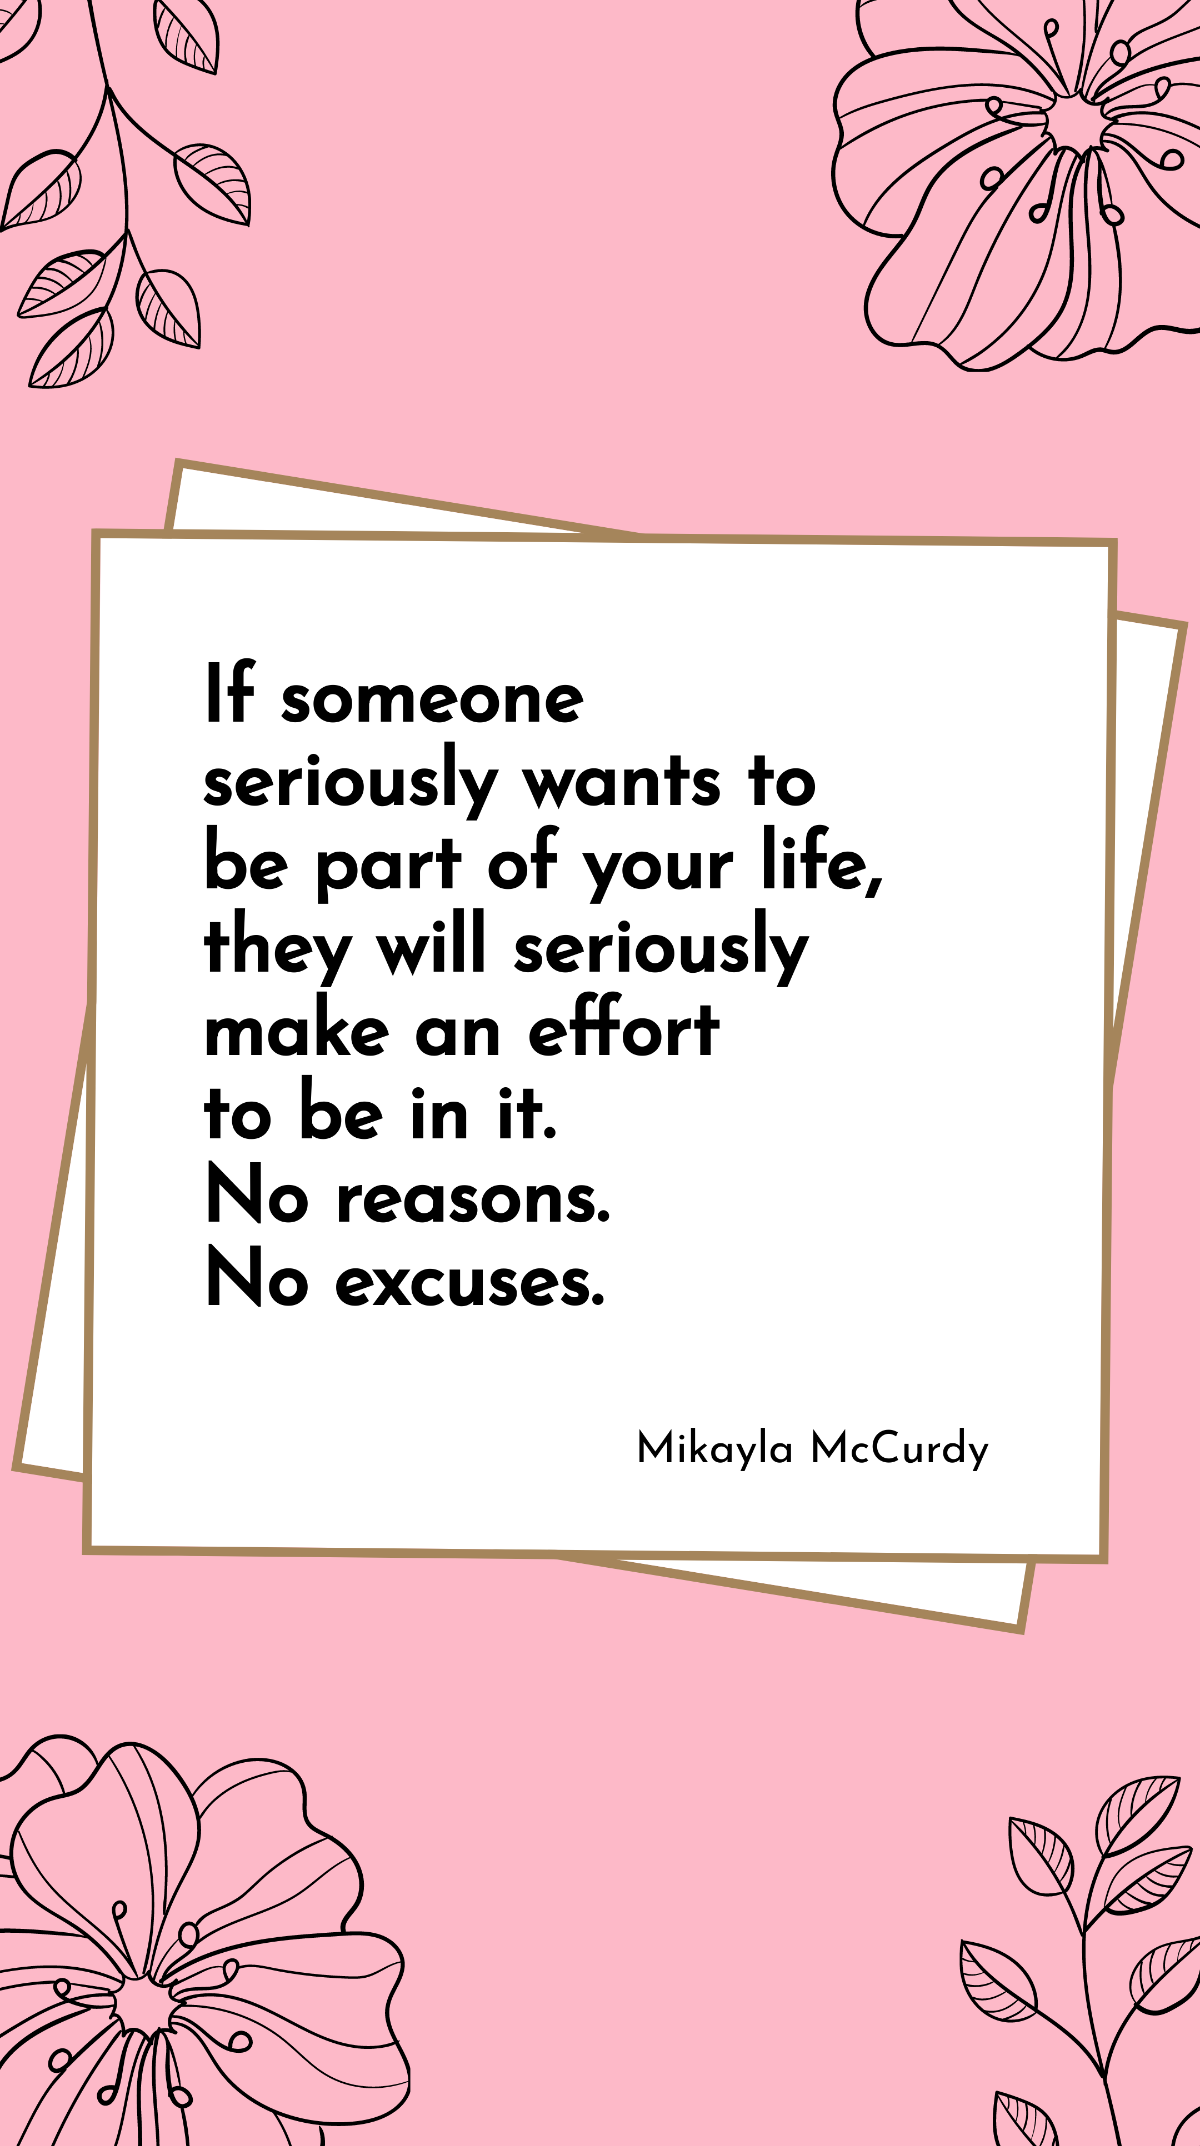 Mikayla McCurdy - If someone seriously wants to be part of your life, they will seriously make an effort to be in it. No reasons. No excuses.  Template